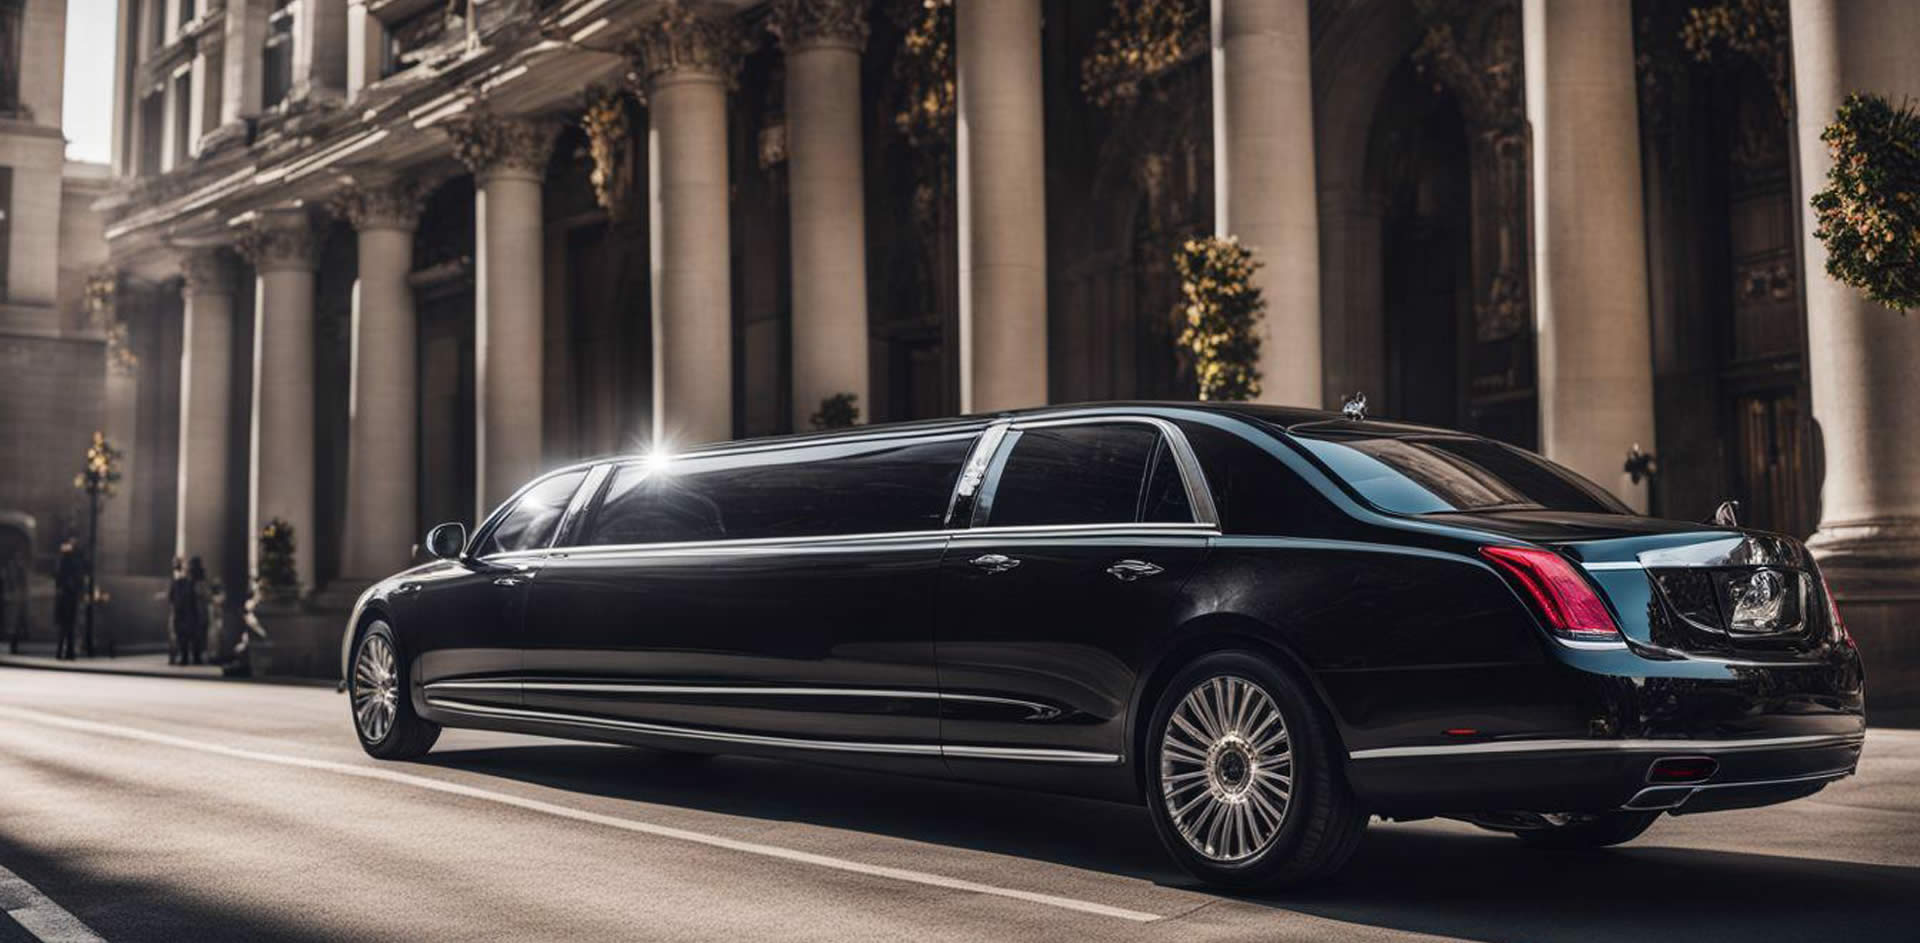 A black limousine on the road